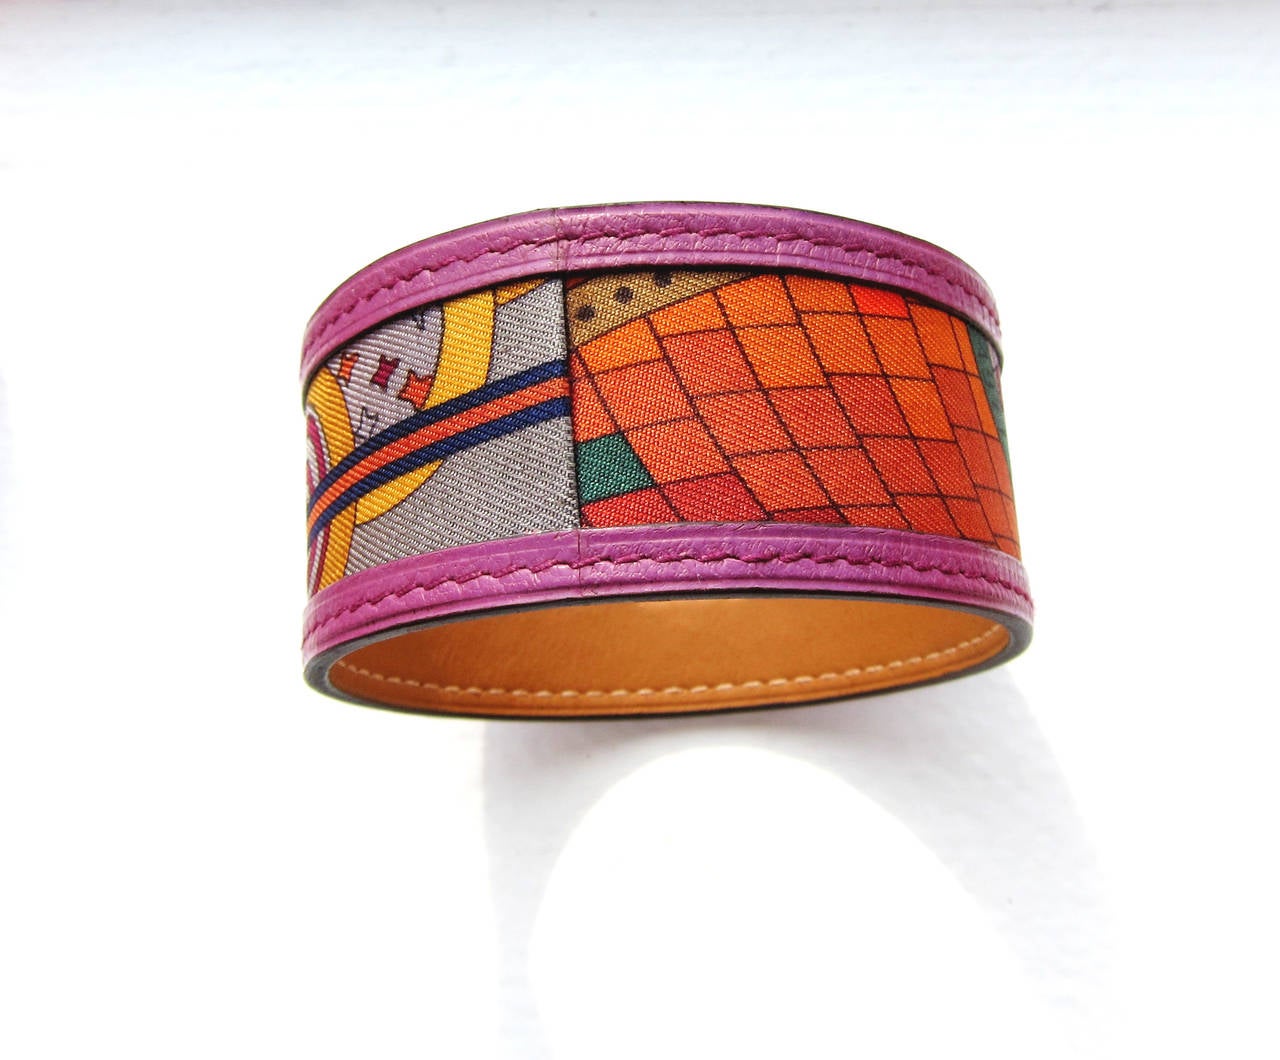  Hermes Petit H Silk Leather Bracelet One of a Kind World Exclusive Unisexe 